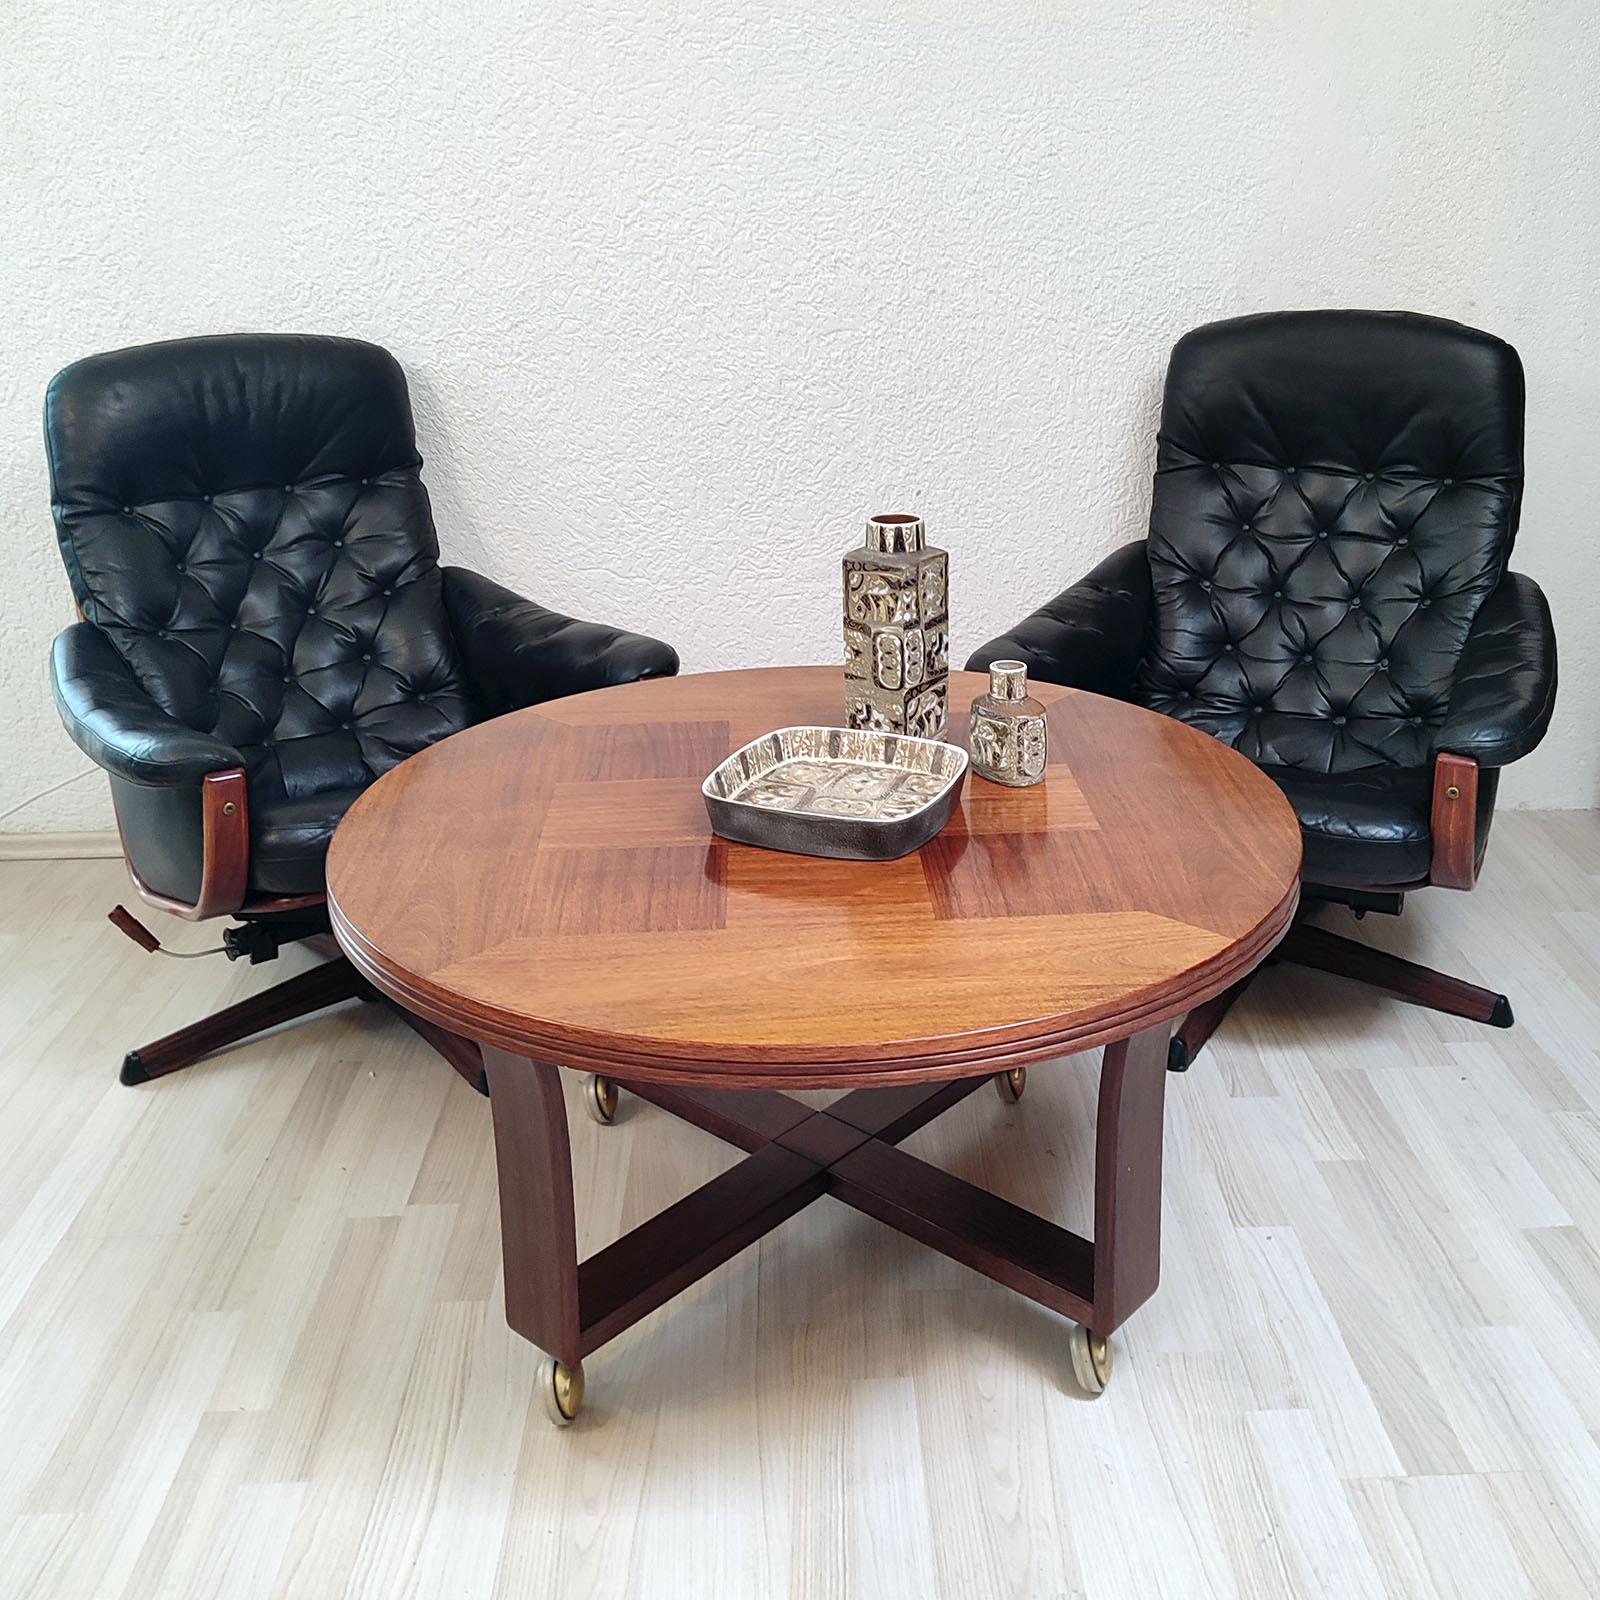 Very comfortable swivel armchairs by Göte Möbel Nassjo from Sweden with adjustable backrest. Curved wooden frame with black leather padded upholstery. Metal star base with a wood pattern application. Good vintage condition. Leather is in good over